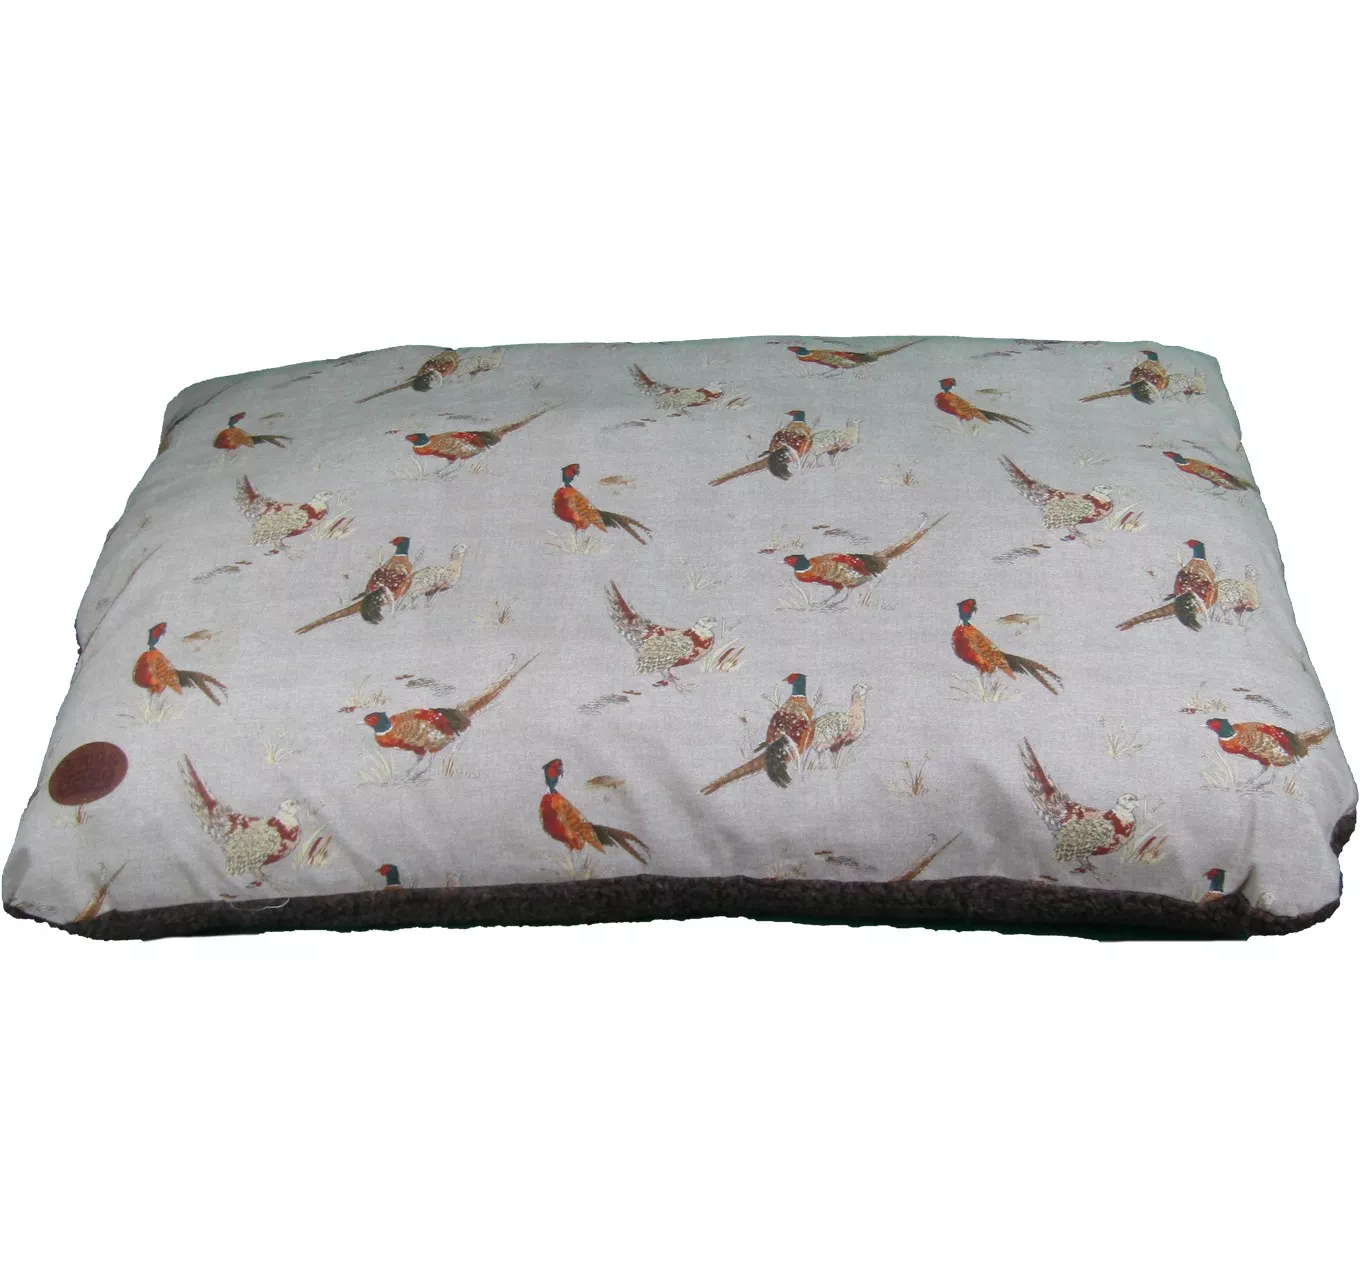 Pheasant Lounger Bed